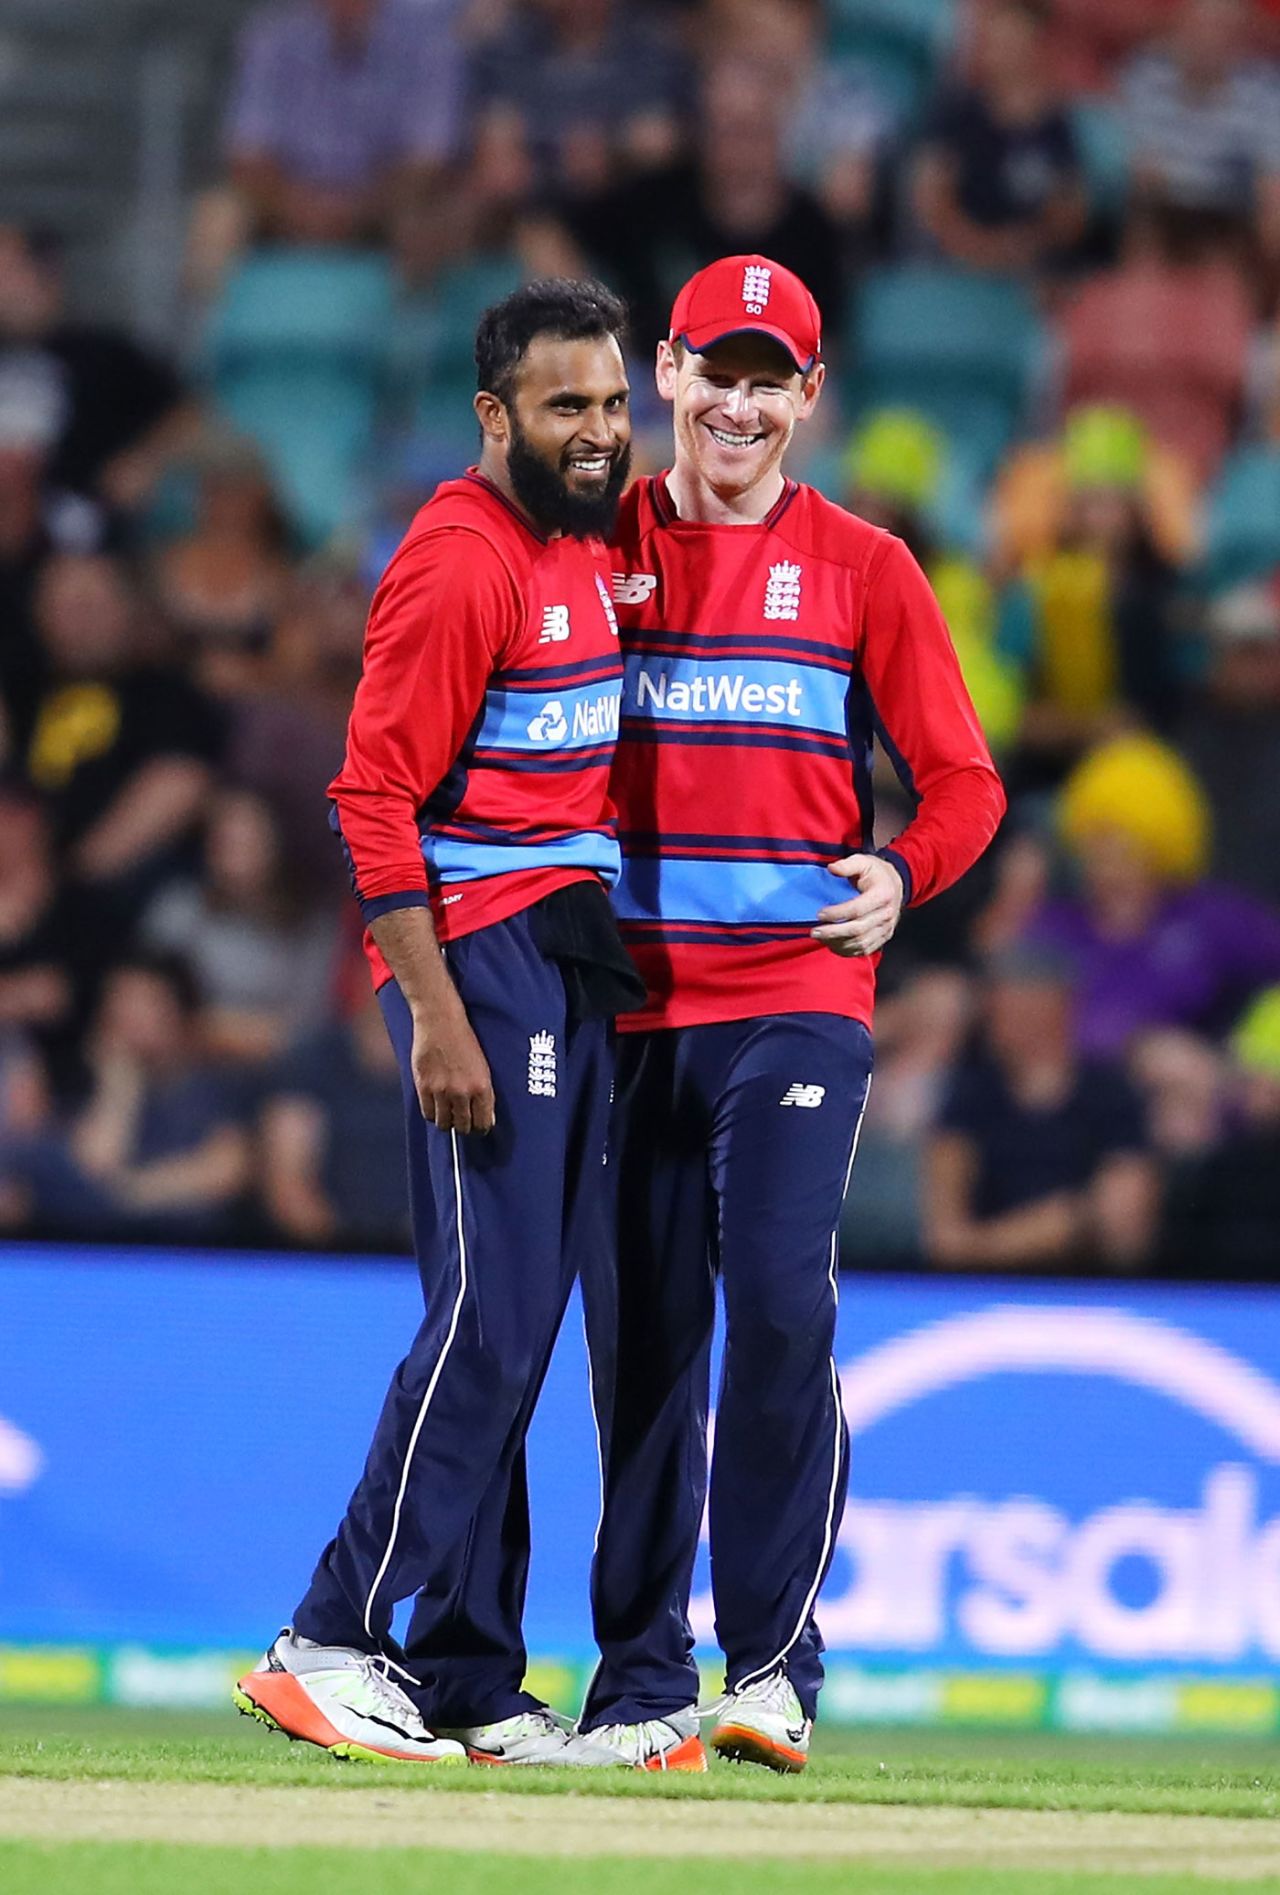 Adil Rashid gets a pat on the back from his captain, Australia v England, 2nd match, T20 Tri-Series, Hobart, February 7, 2018